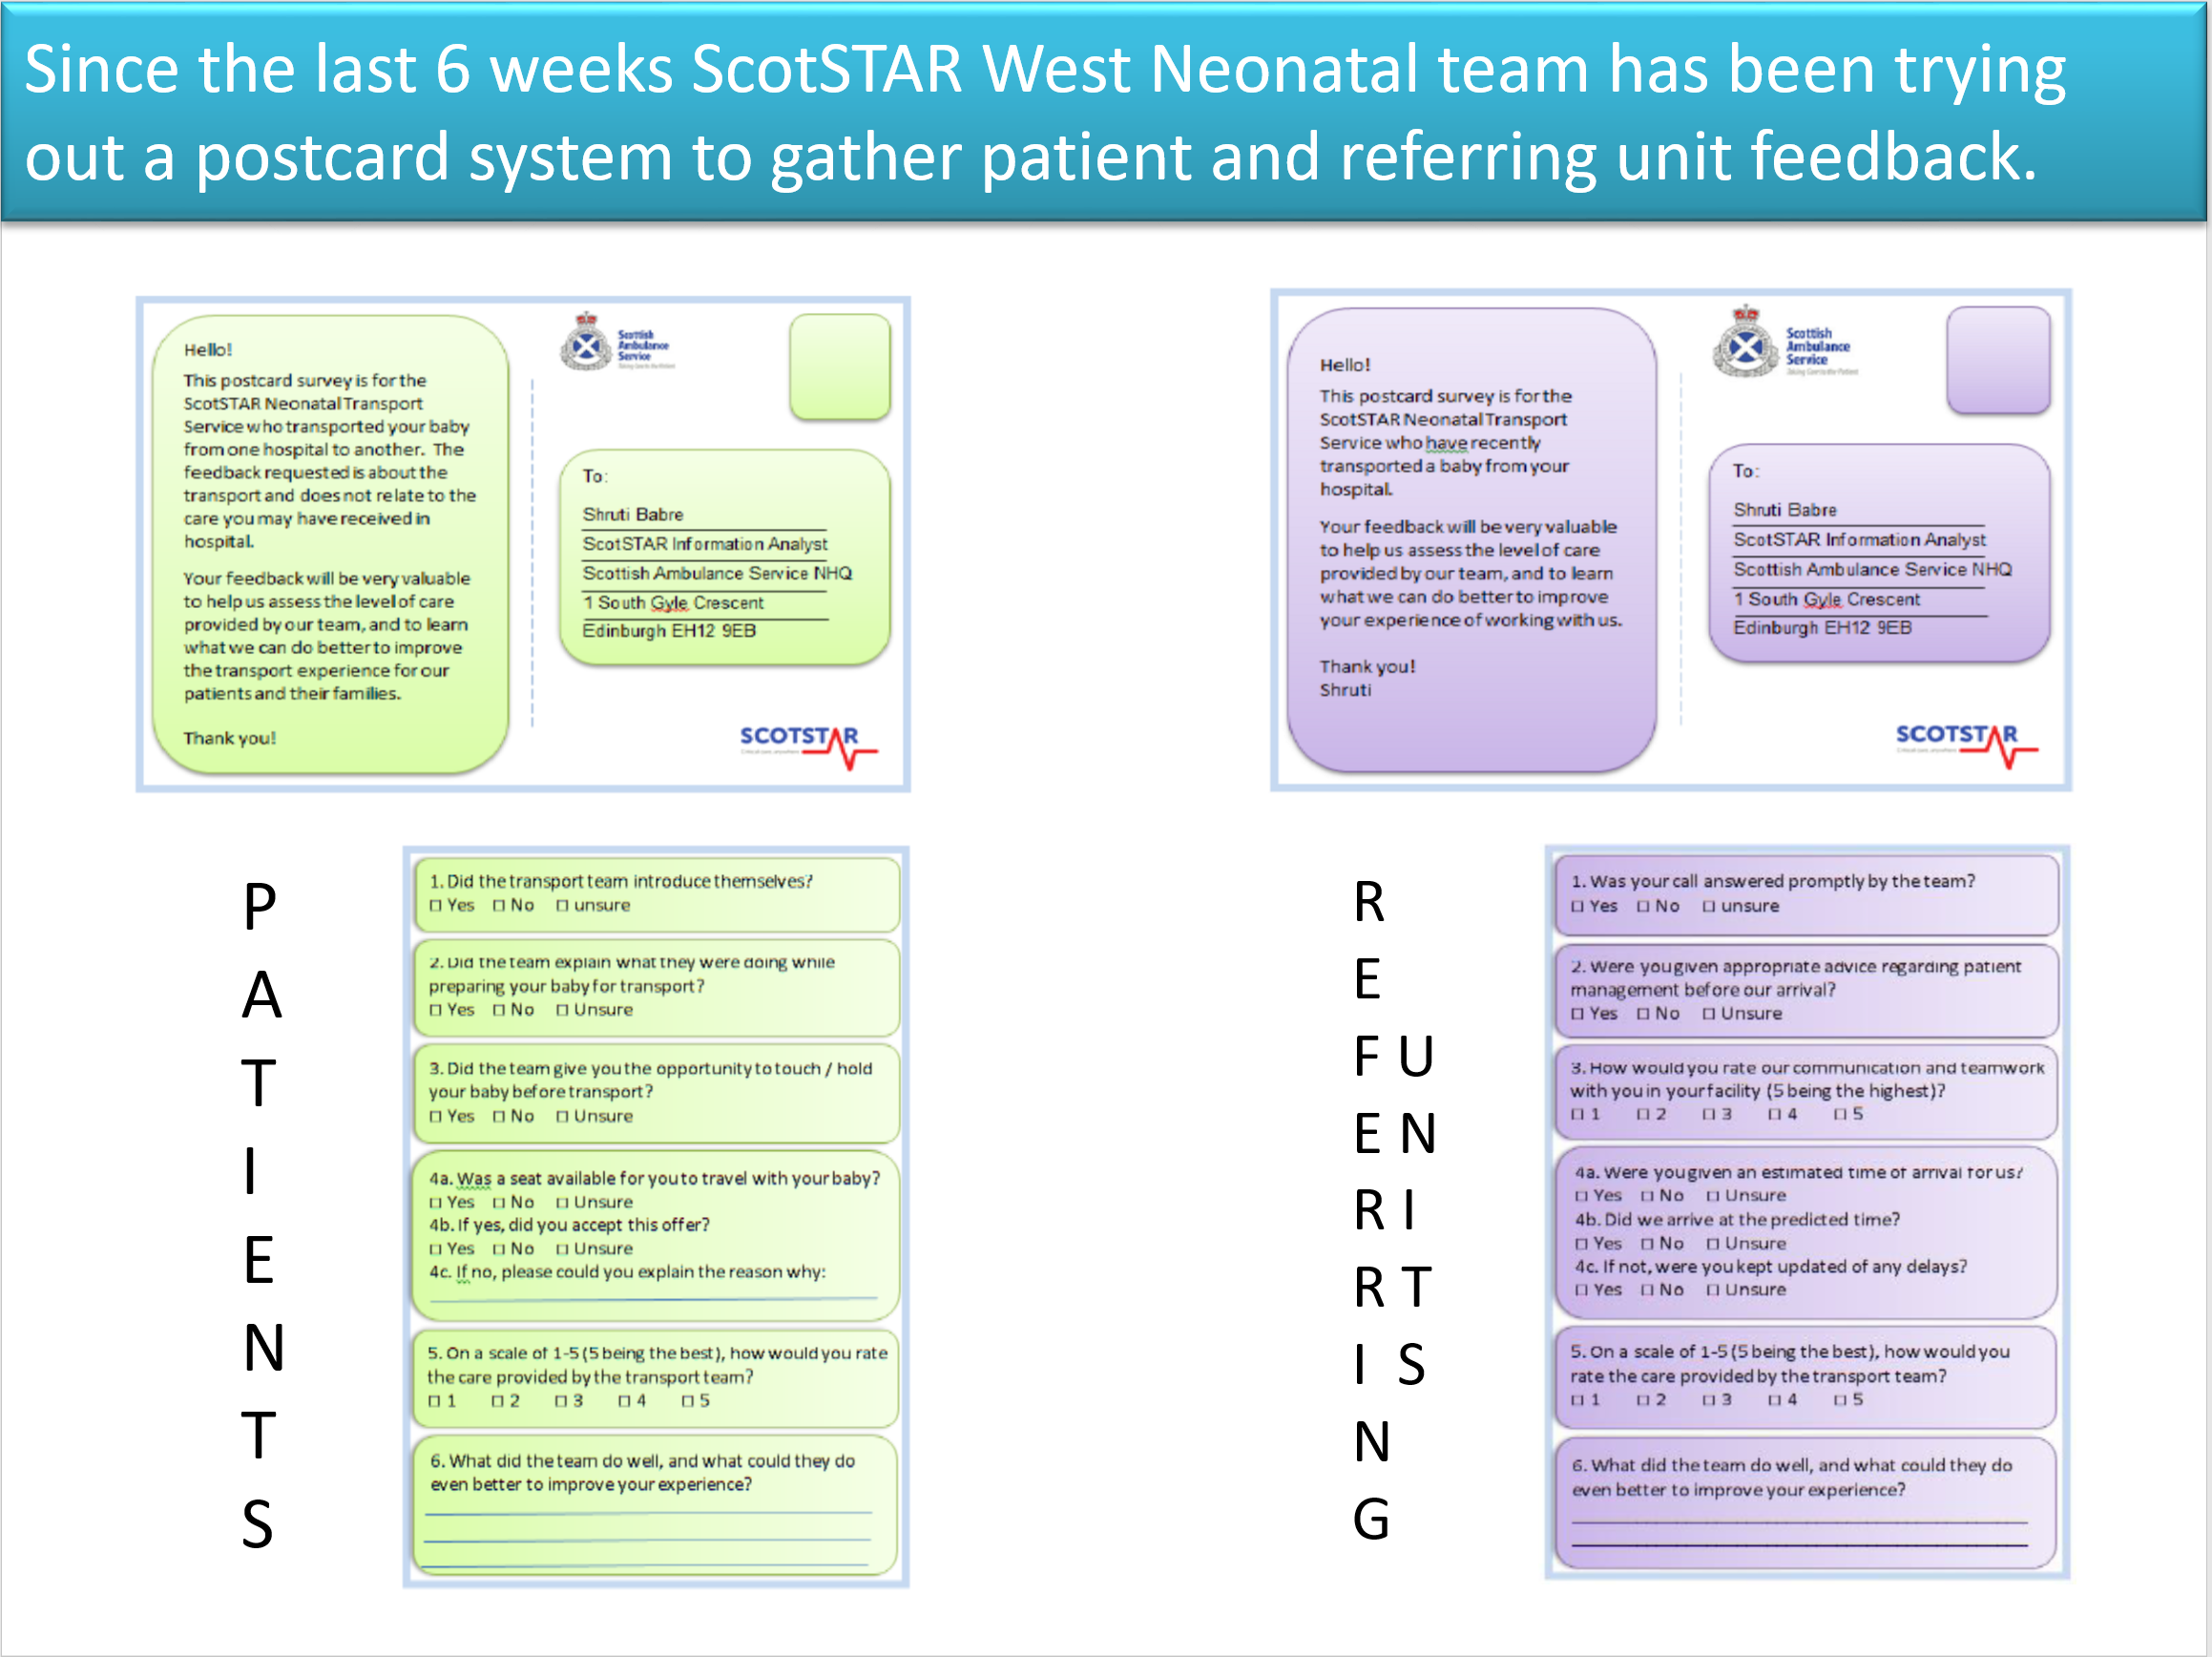 Using Postcards to gather Patient and Referring Unit Feedback at ScotSTAR featured image